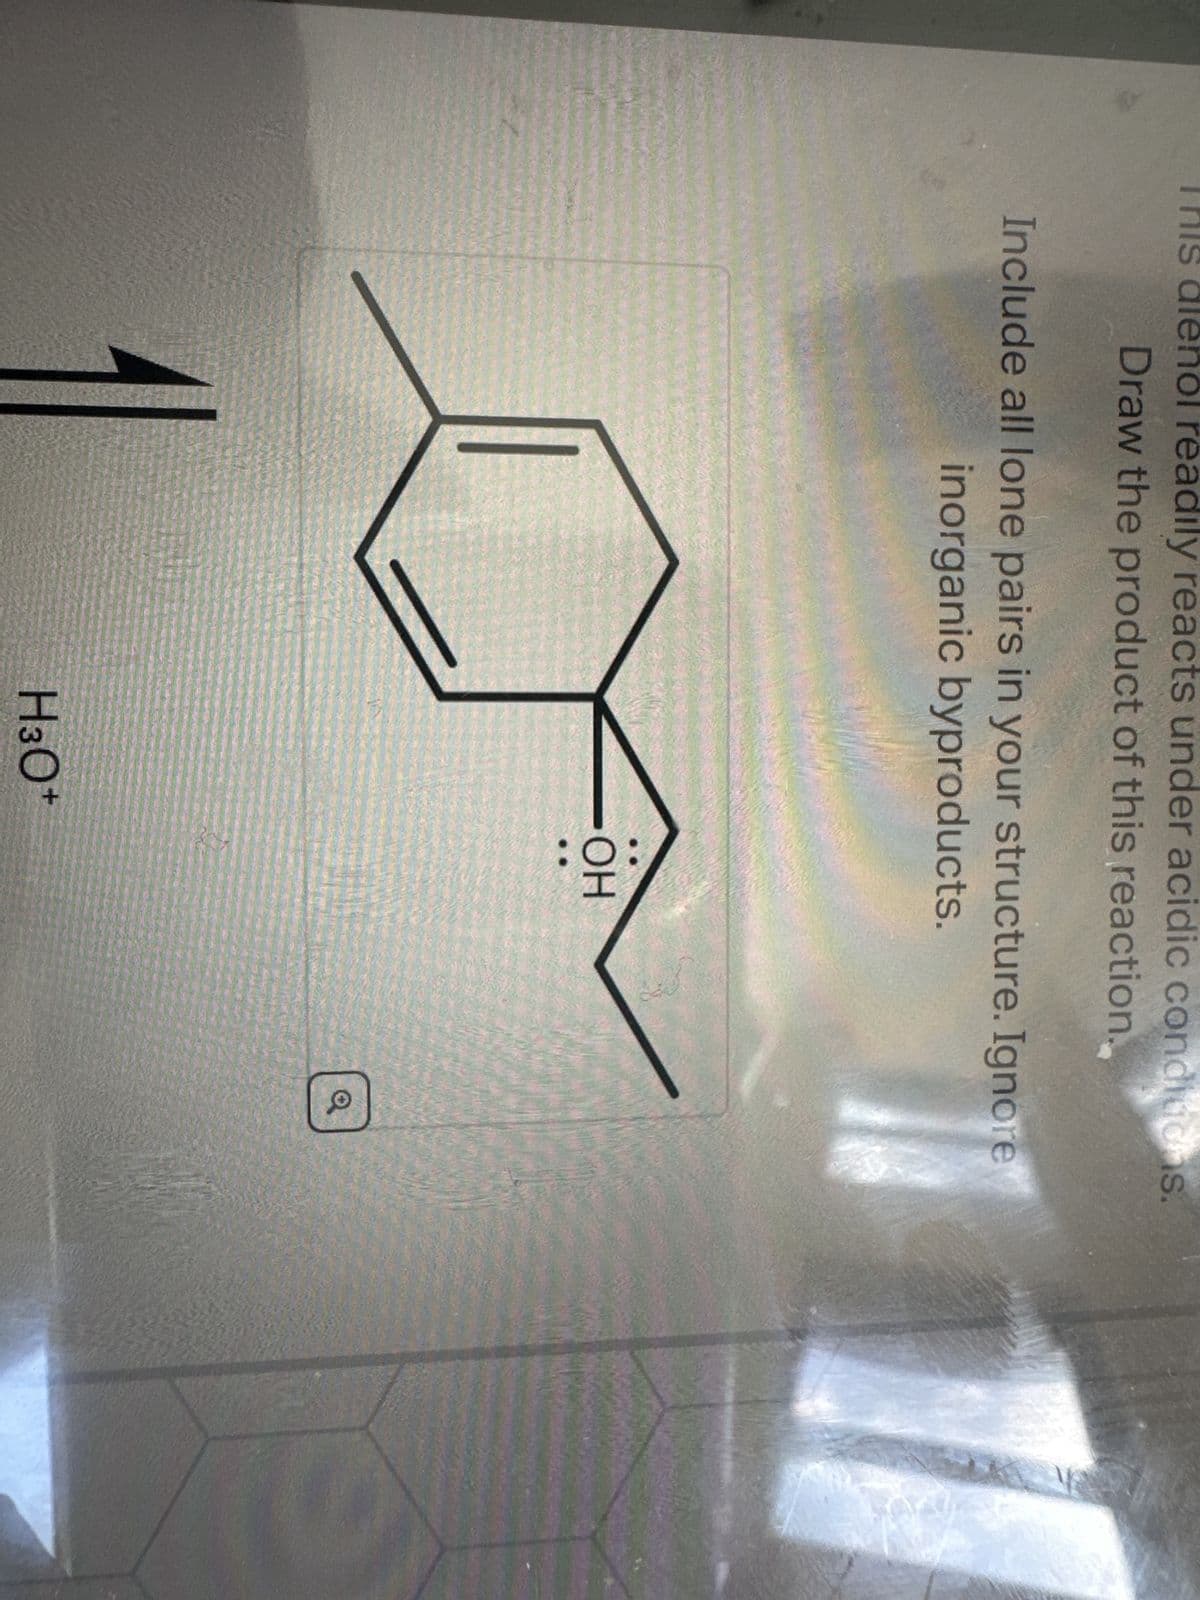 readily reacts under acidic condiuchs.
Draw the product of this reaction.
Include all lone pairs in your structure. Ignore
inorganic byproducts.
H3O+
-ОН
Q